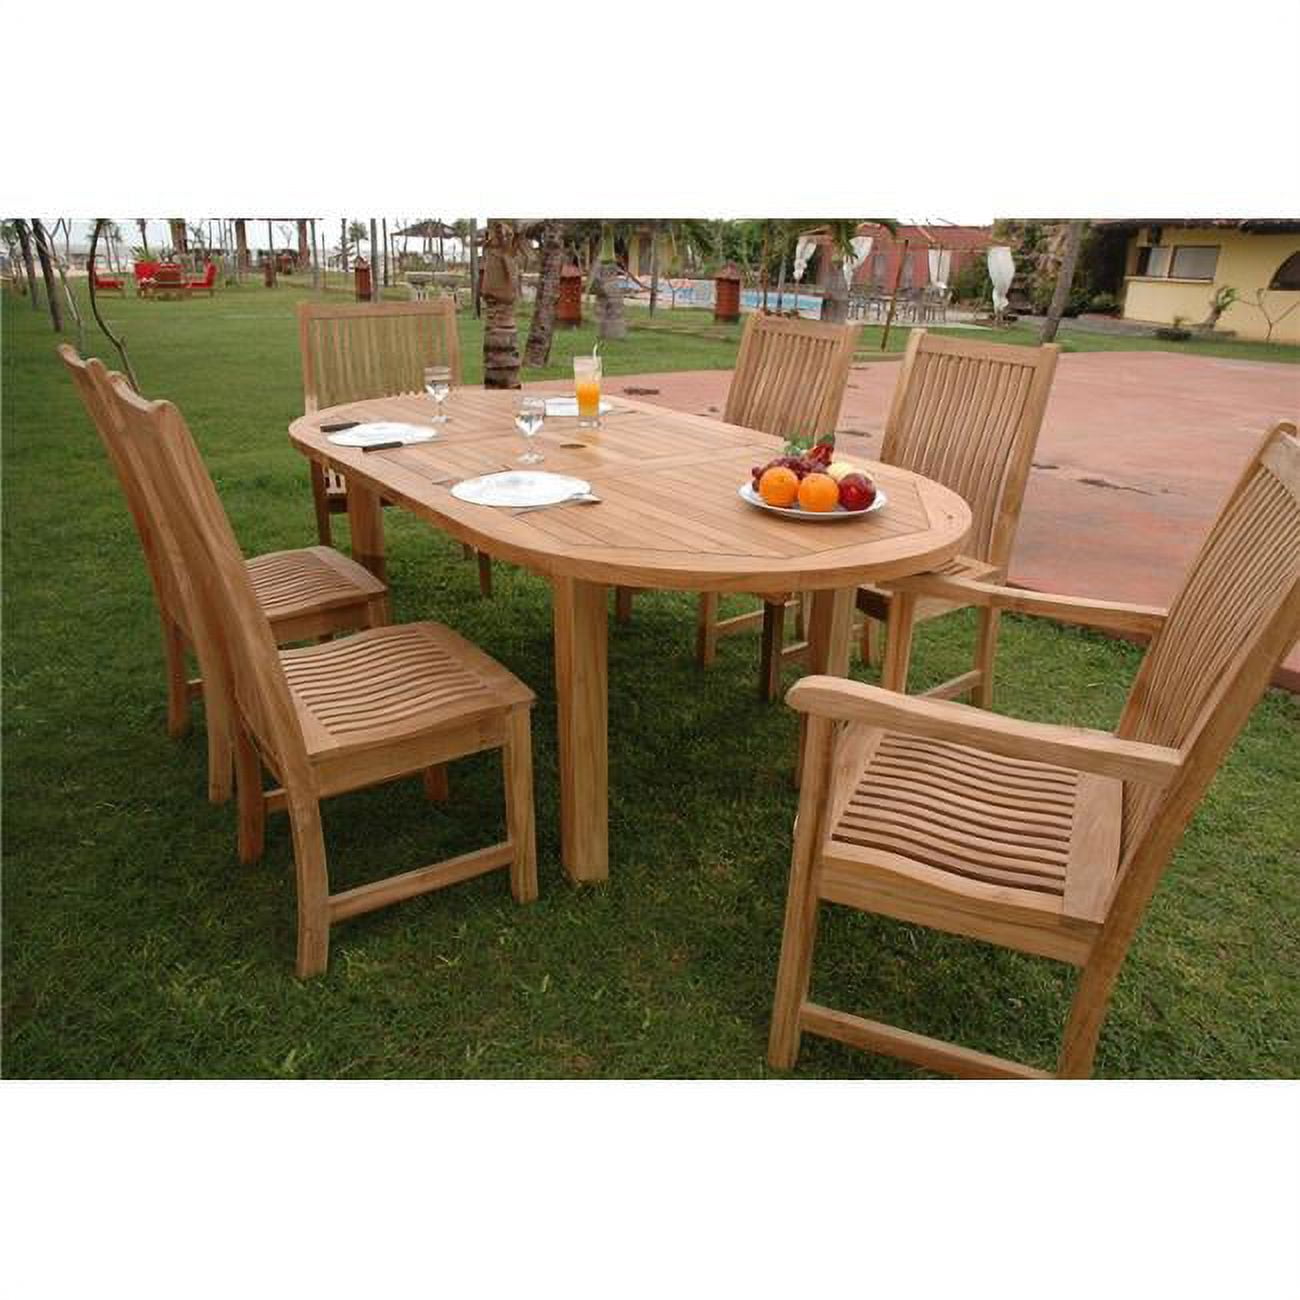 Set-29 78 In. Oval Extension Table